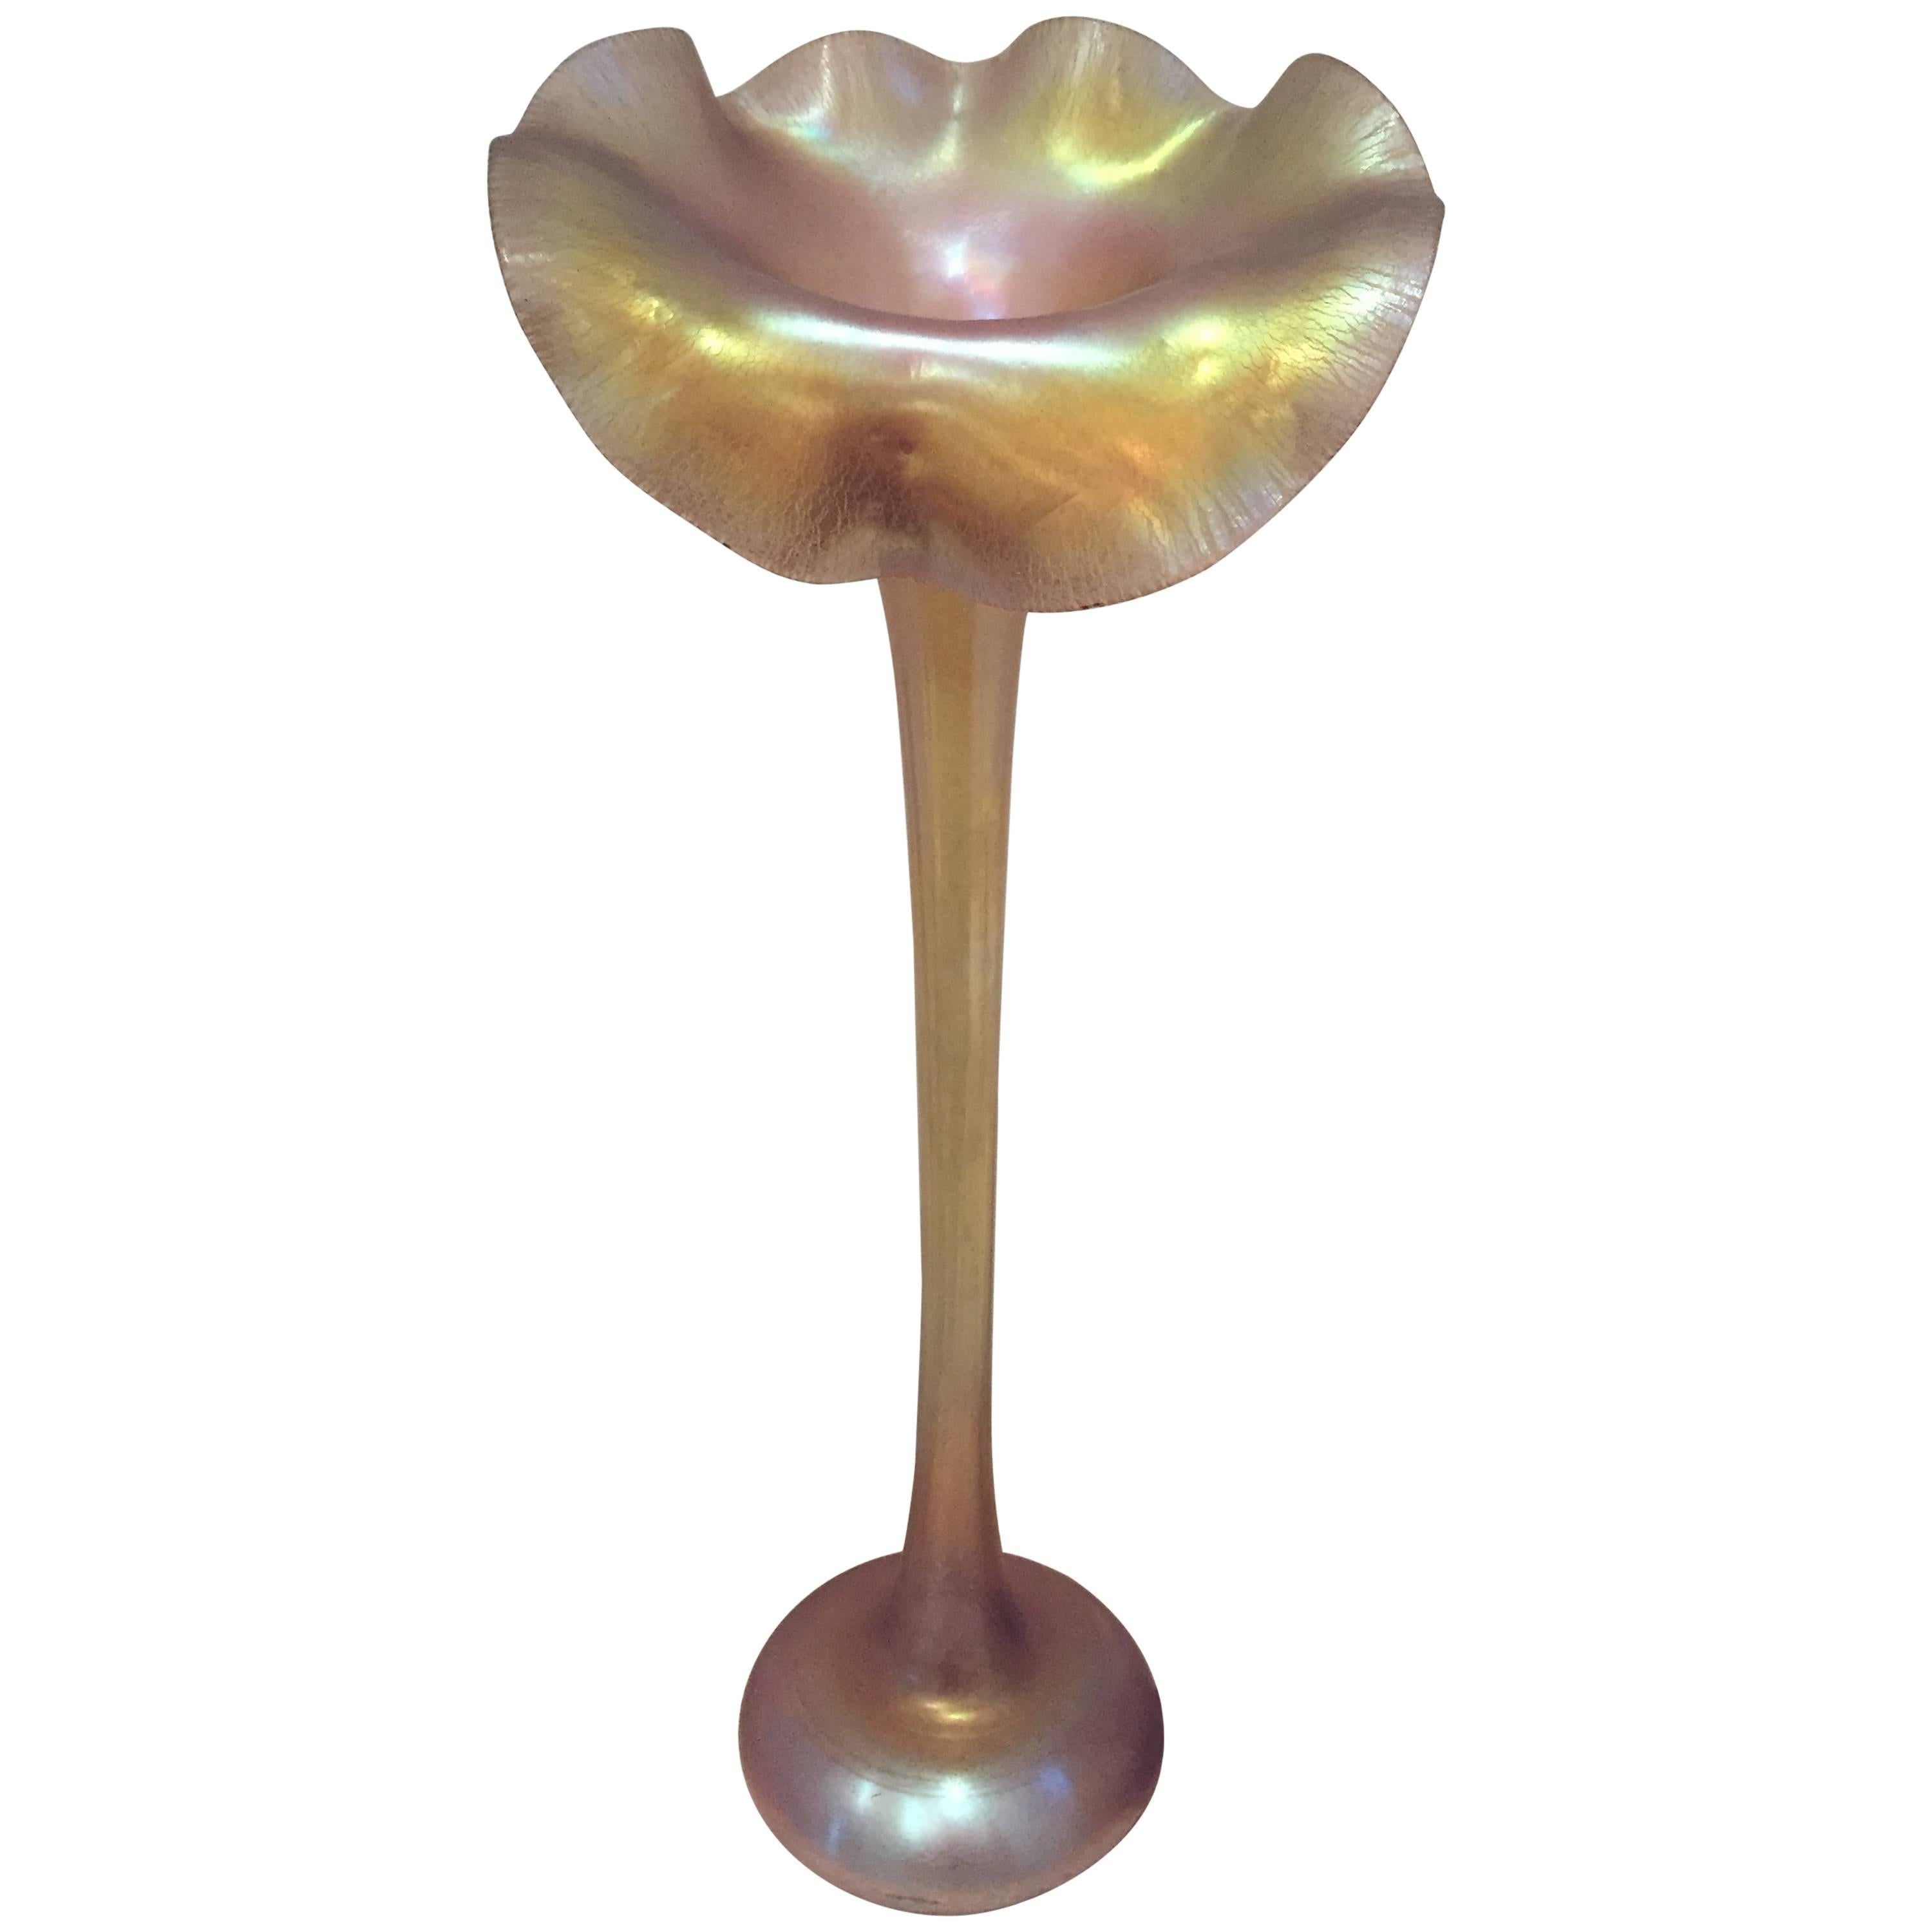 Tiffany Studios Gold Favrile Tall Jack in the Pulpit, Signed, 20th Century For Sale